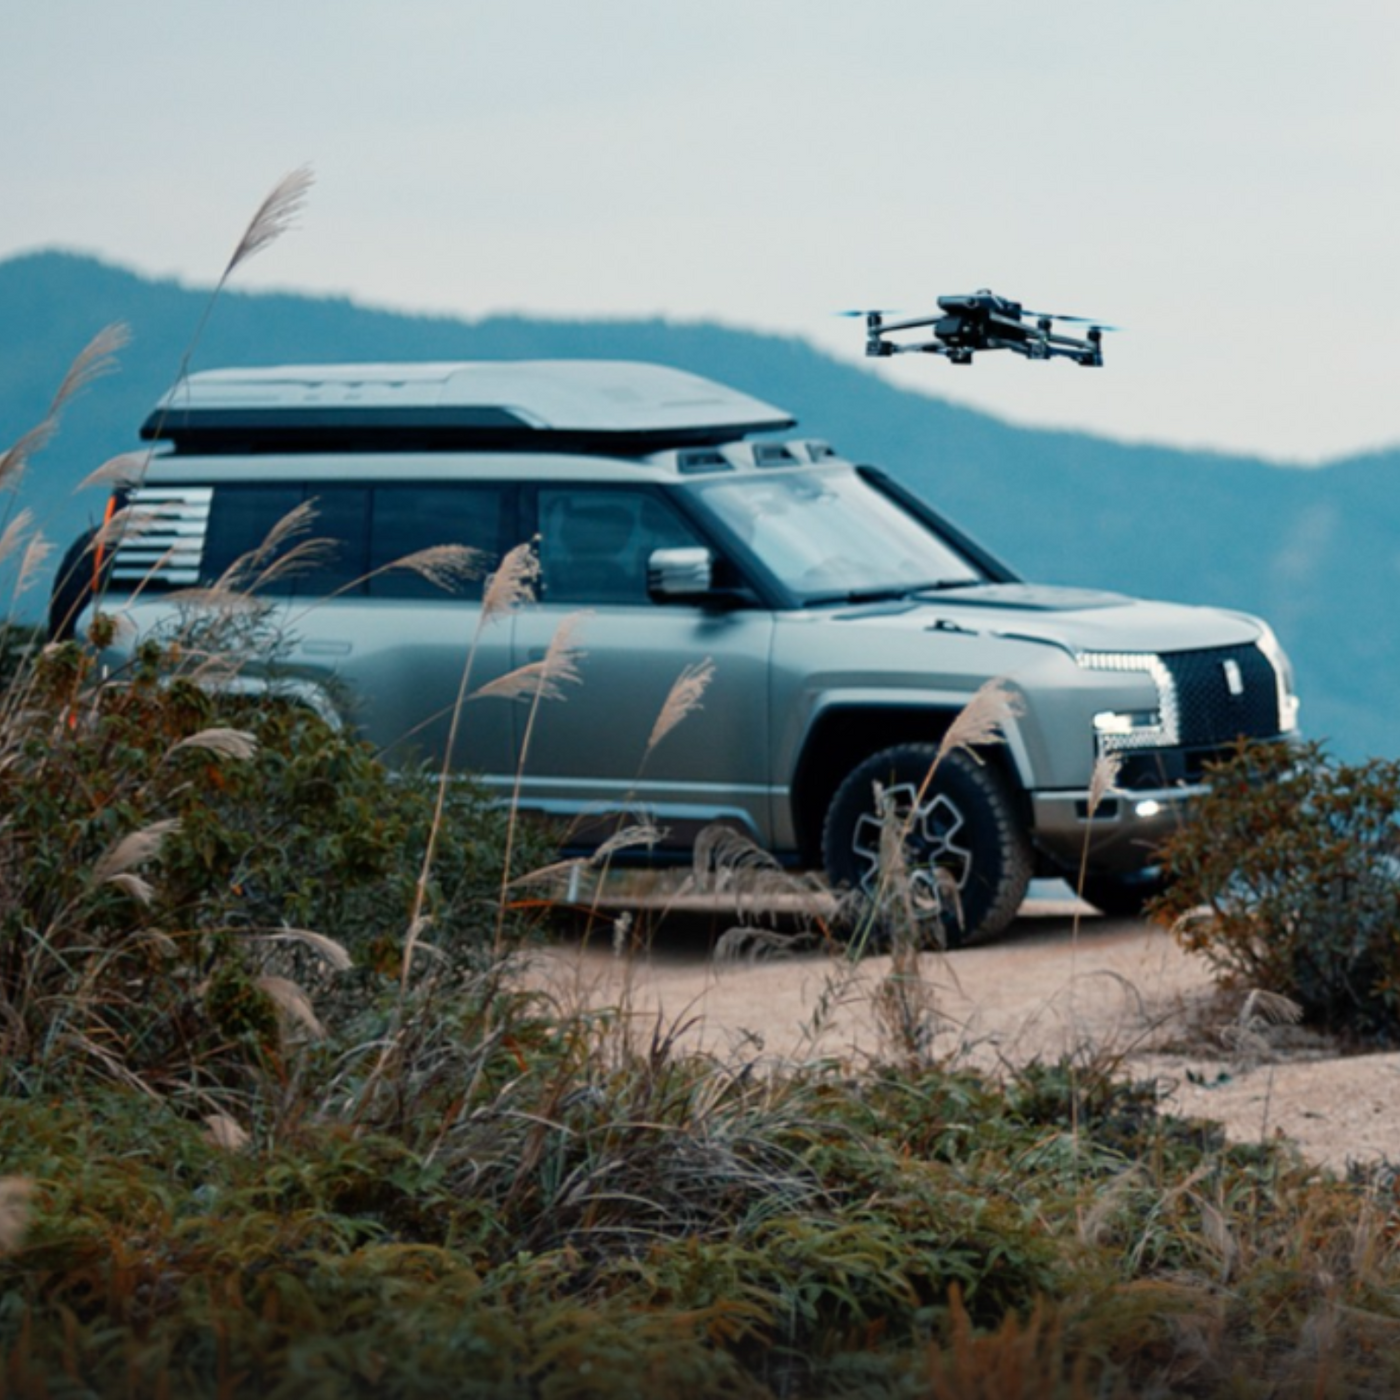 DJI And BYD Unveil 'World's First Vehicle-Mounted Drone'